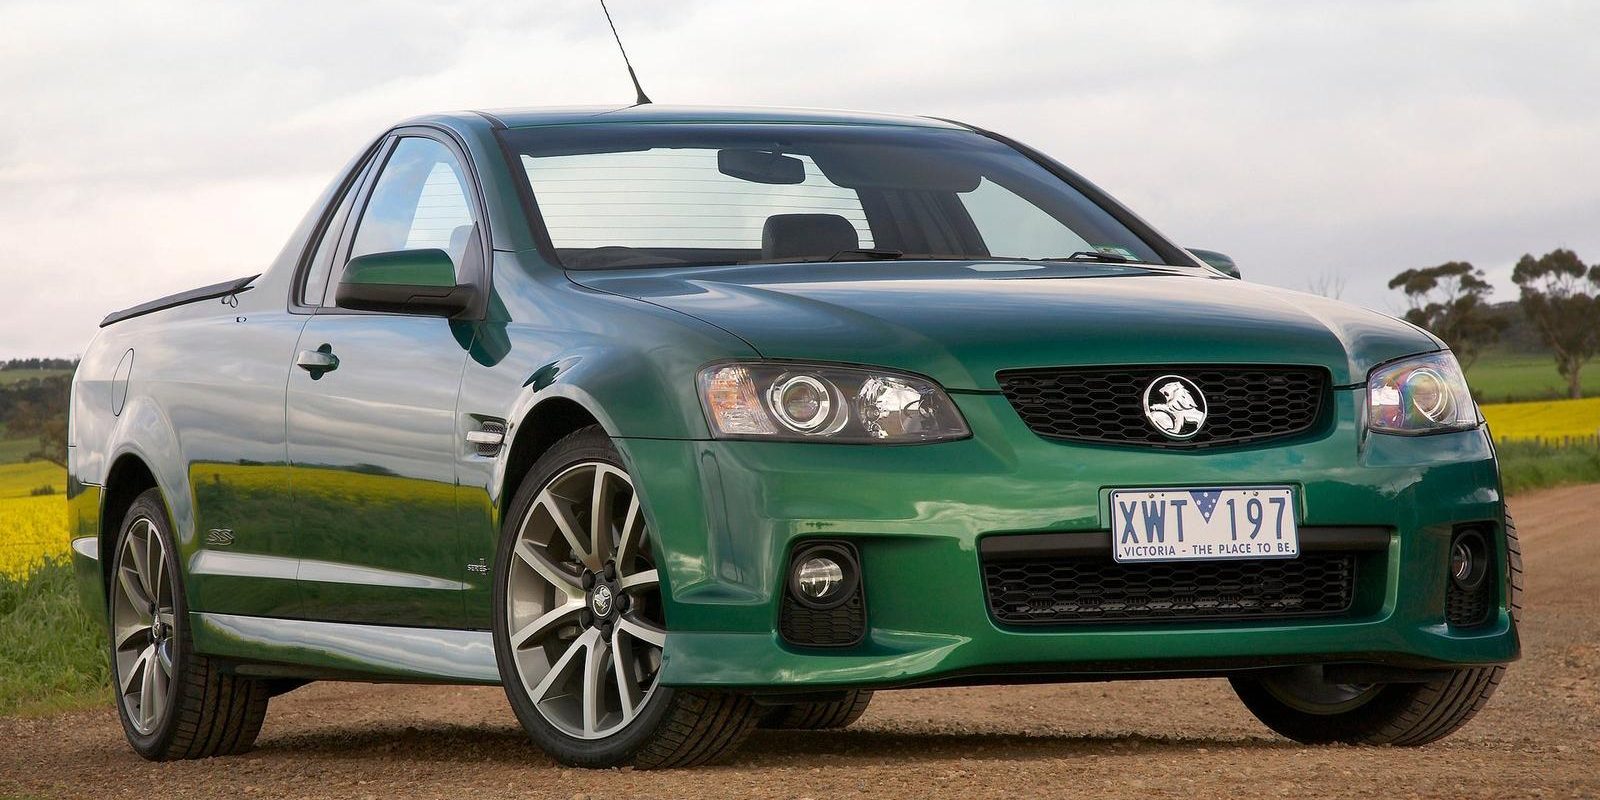 The best colours for new cars in Australia